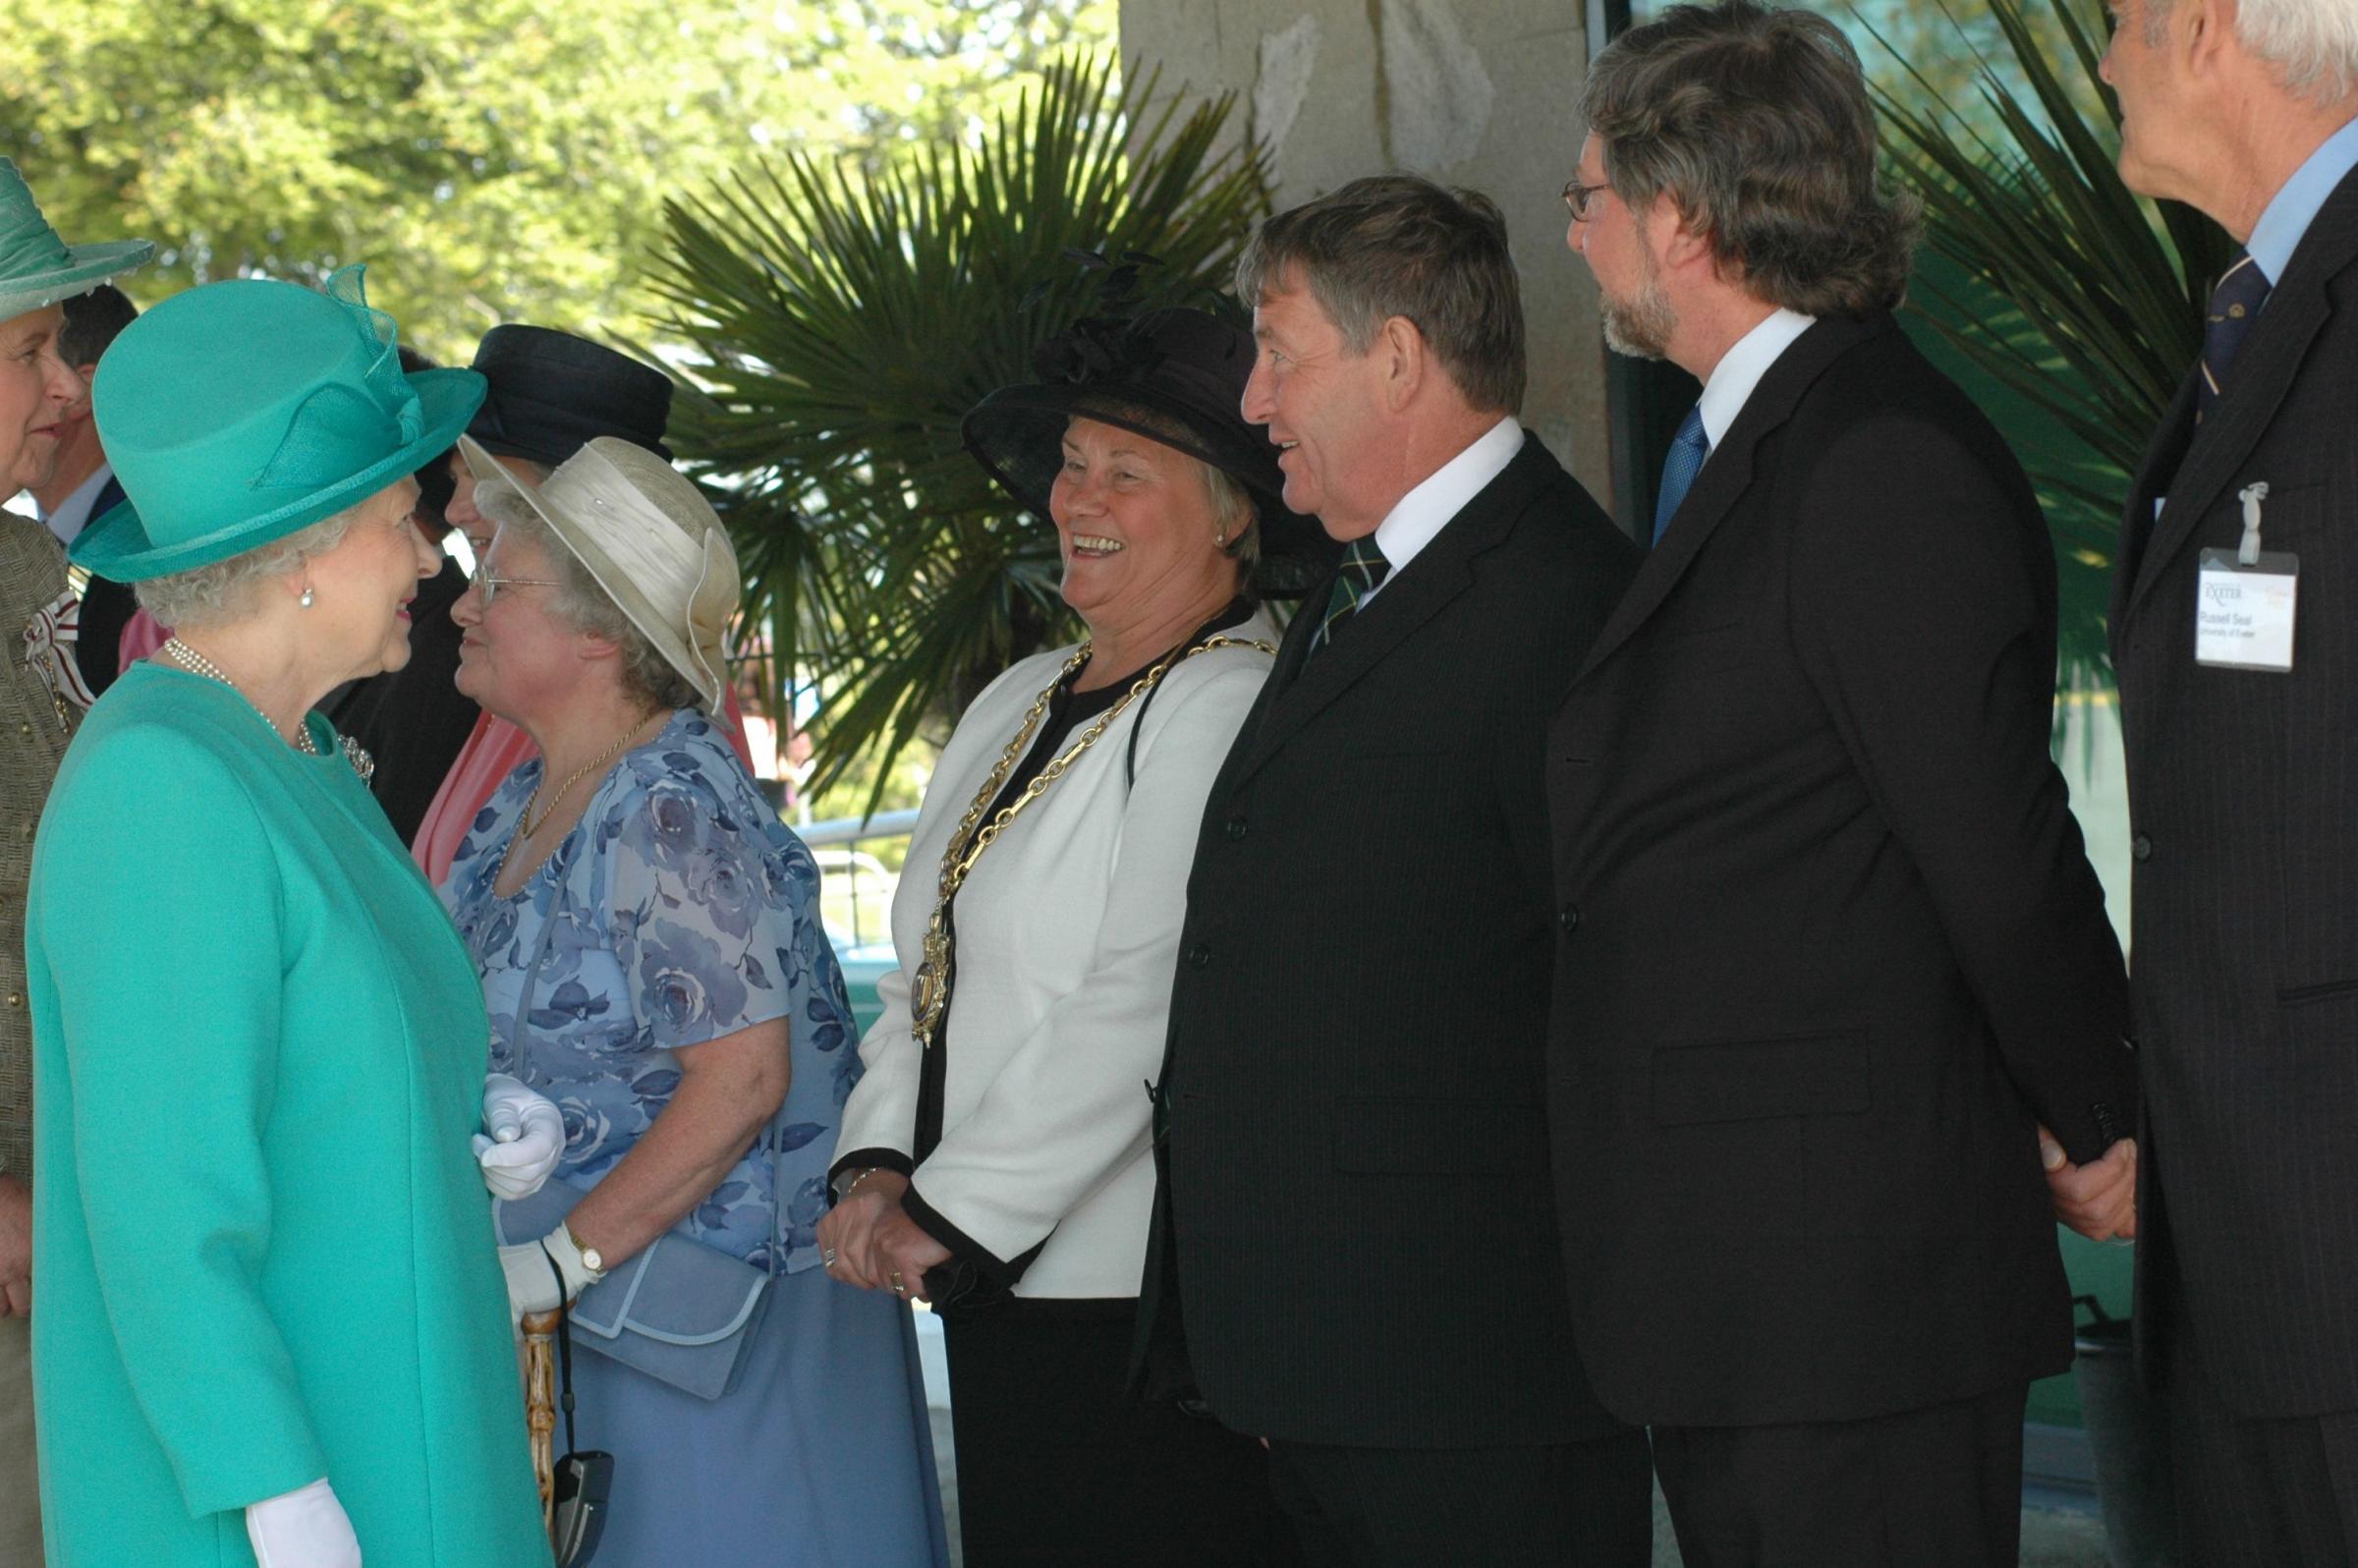 The Queen meets Penryn mayor Gill Grant, next to Falmouths Roger Bonney